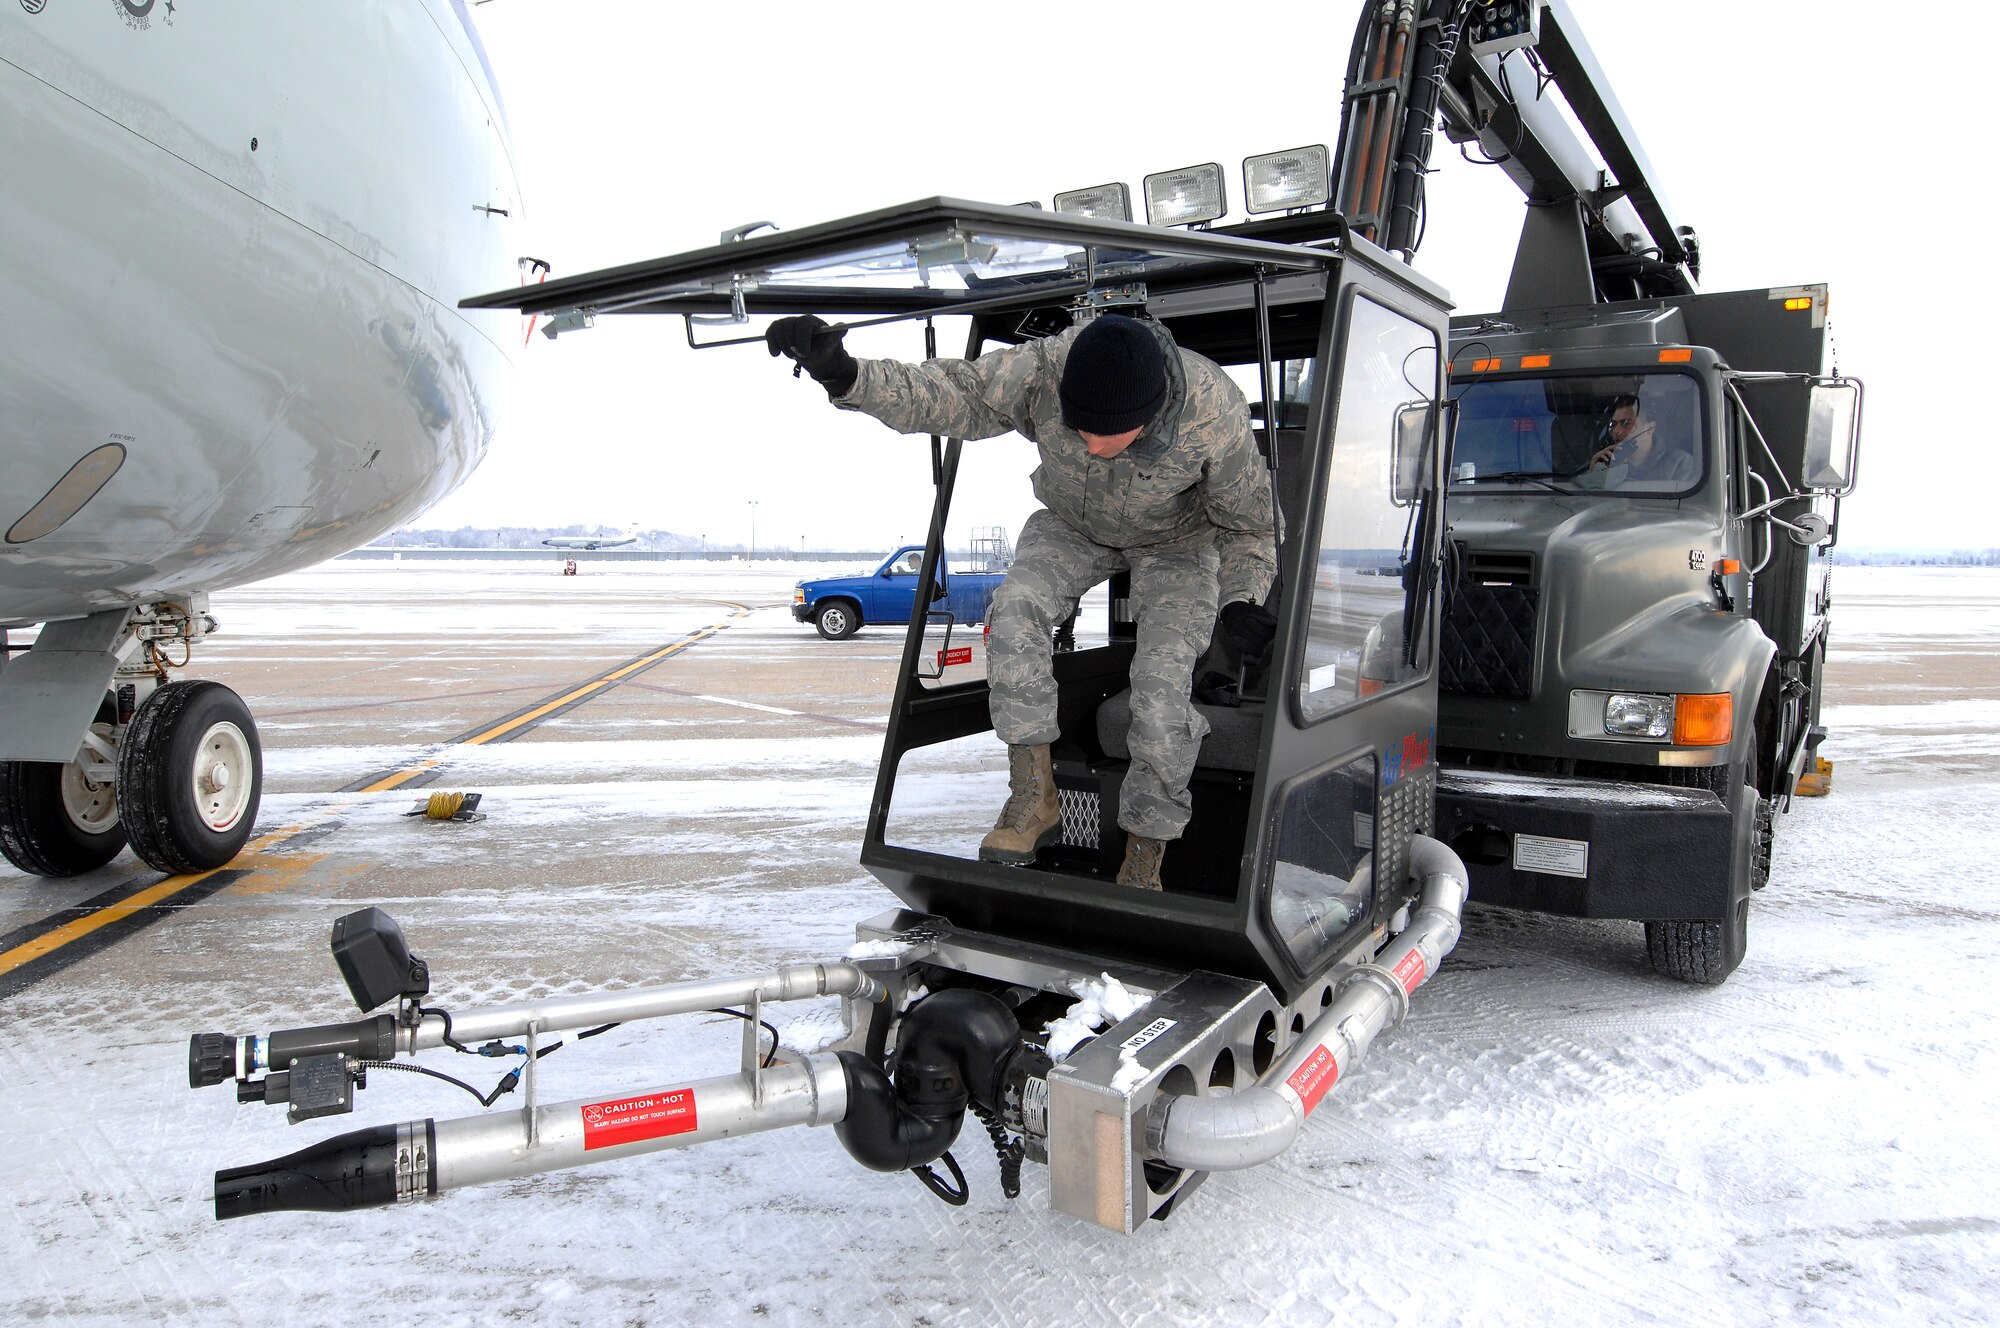 U.S. Air Force Senior Airman Kyle Kindig climbs into the bucket of a deicing truck boom Feb. 3 at Offutt Air Force Base Neb. The equipment is used to blow accumulated snow off of aircraft and to spray a deicing fluid as part of preparations for an aircraft takeoff during colder weather. Additional maintenance time is typically needed during winter operations to heat the aircraft and to remove snow and ice.  Kindig is a guidance and control maintenance technician assigned to the 83rd Aircraft Maintenance Unit, 55 Aircraft Maintenance Squadron. (U.S. Air Force photo by Delanie Stafford/Released)